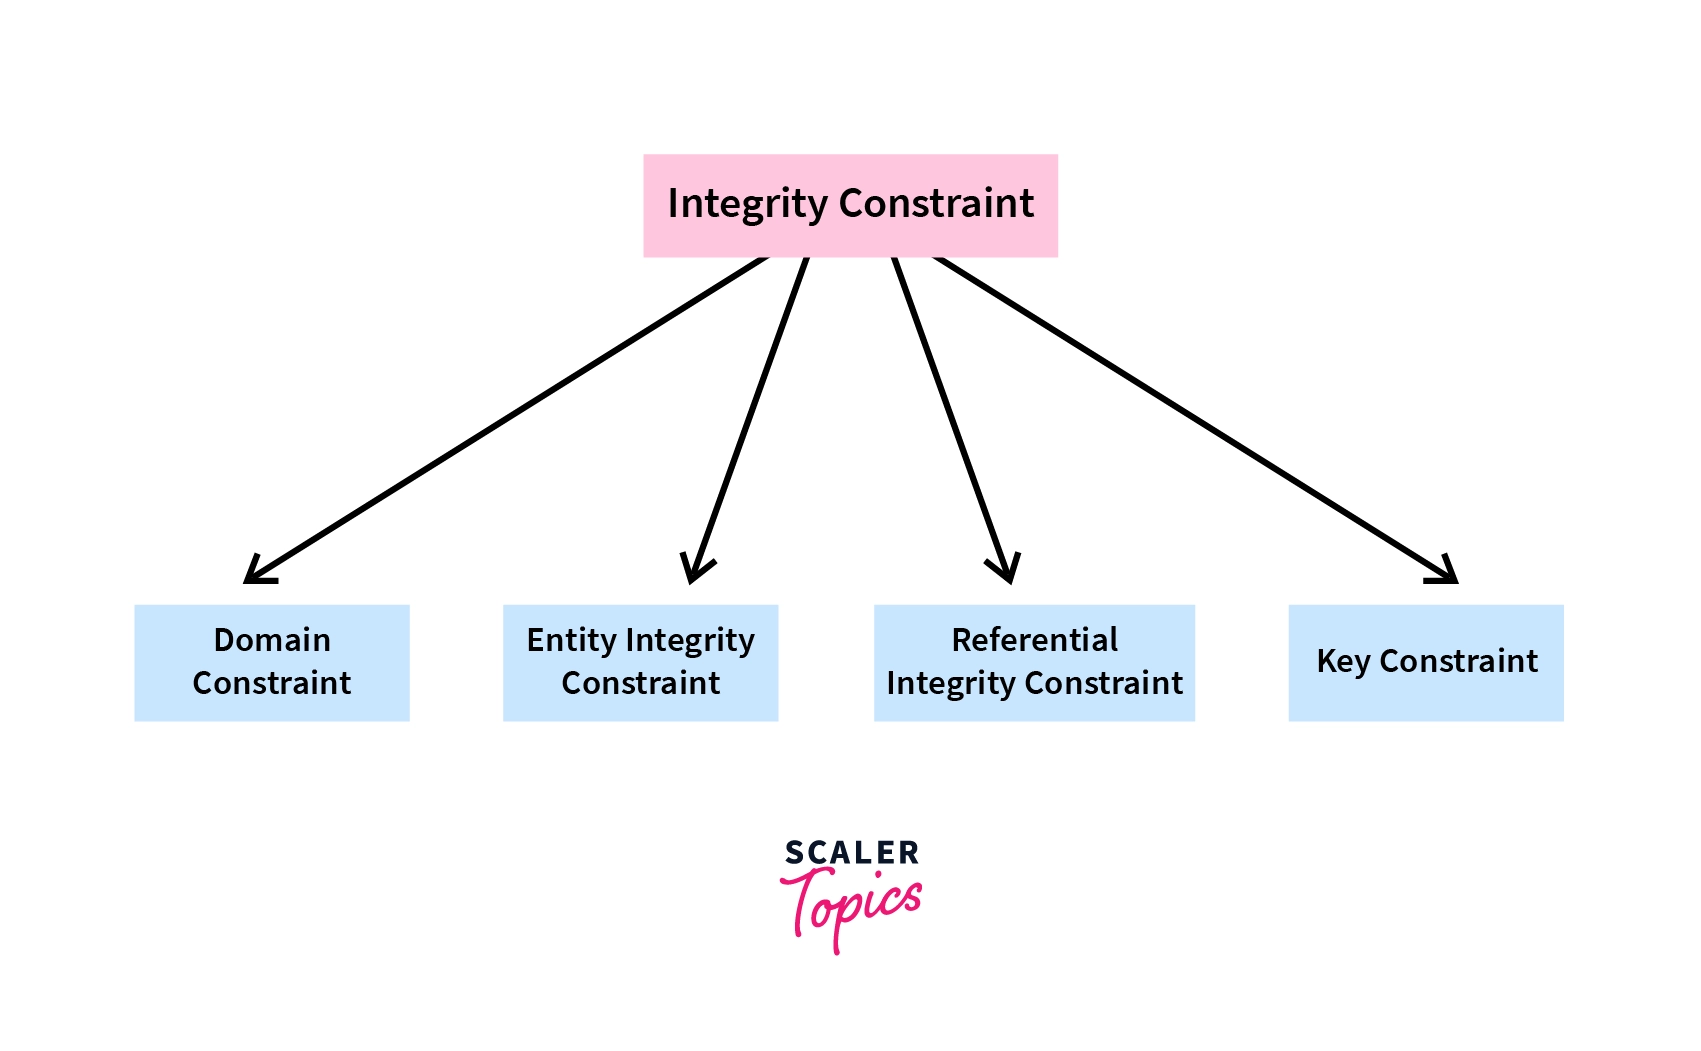 Types of Integrity Constraints